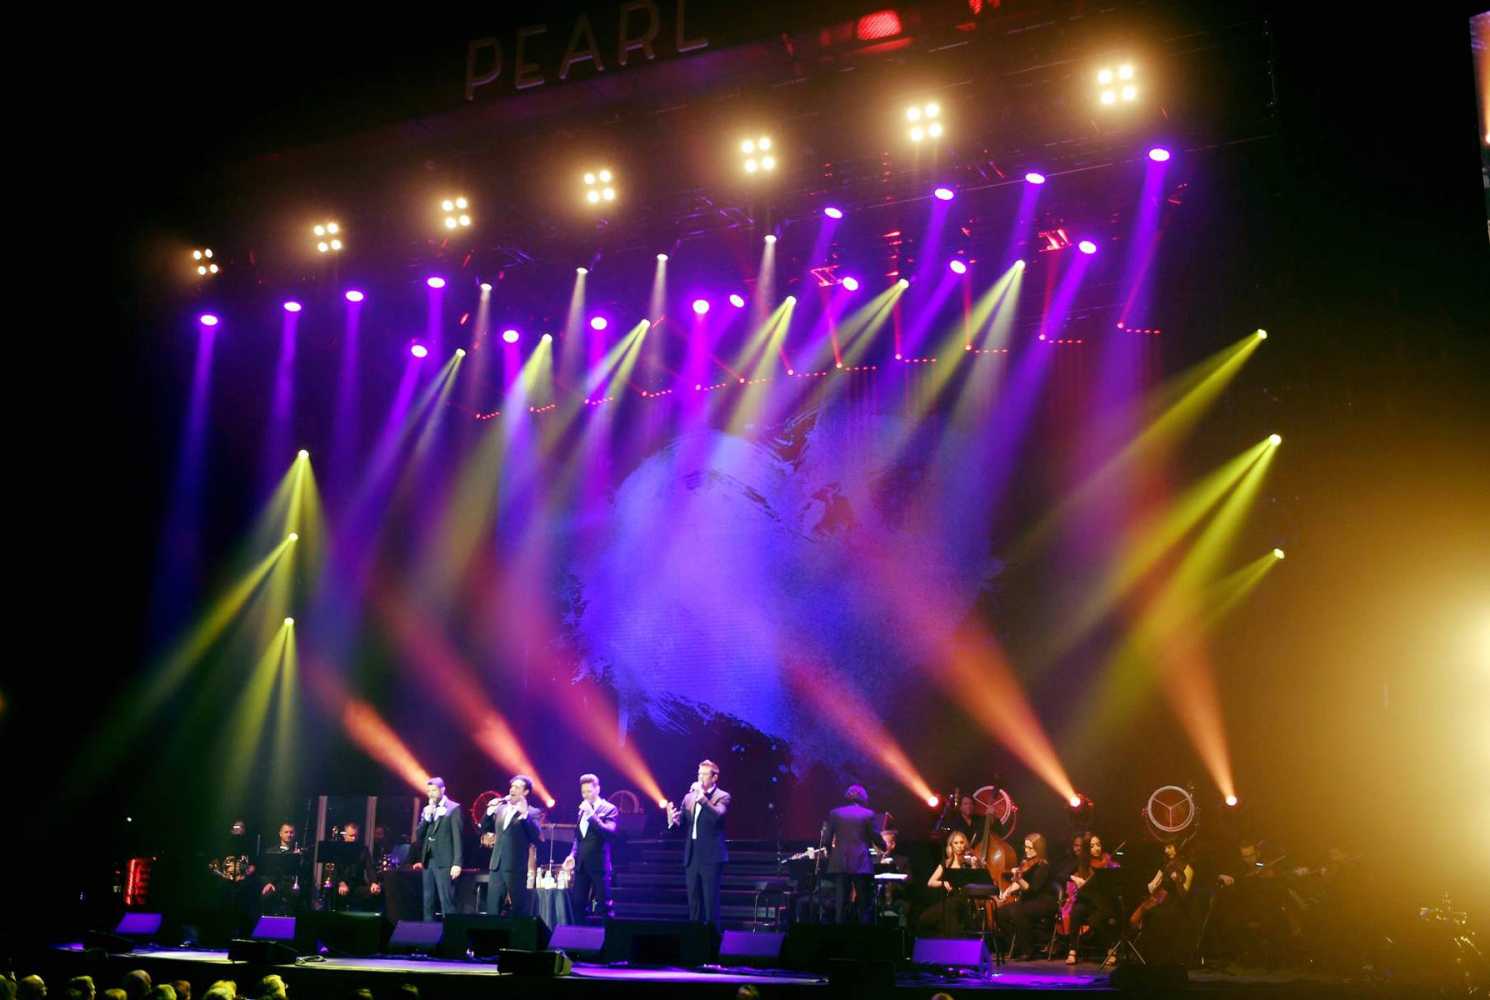 Il Divo is being supported by a versatile lightshow anchored by Chauvet Professional fixtures (photo: Denise Truscello)